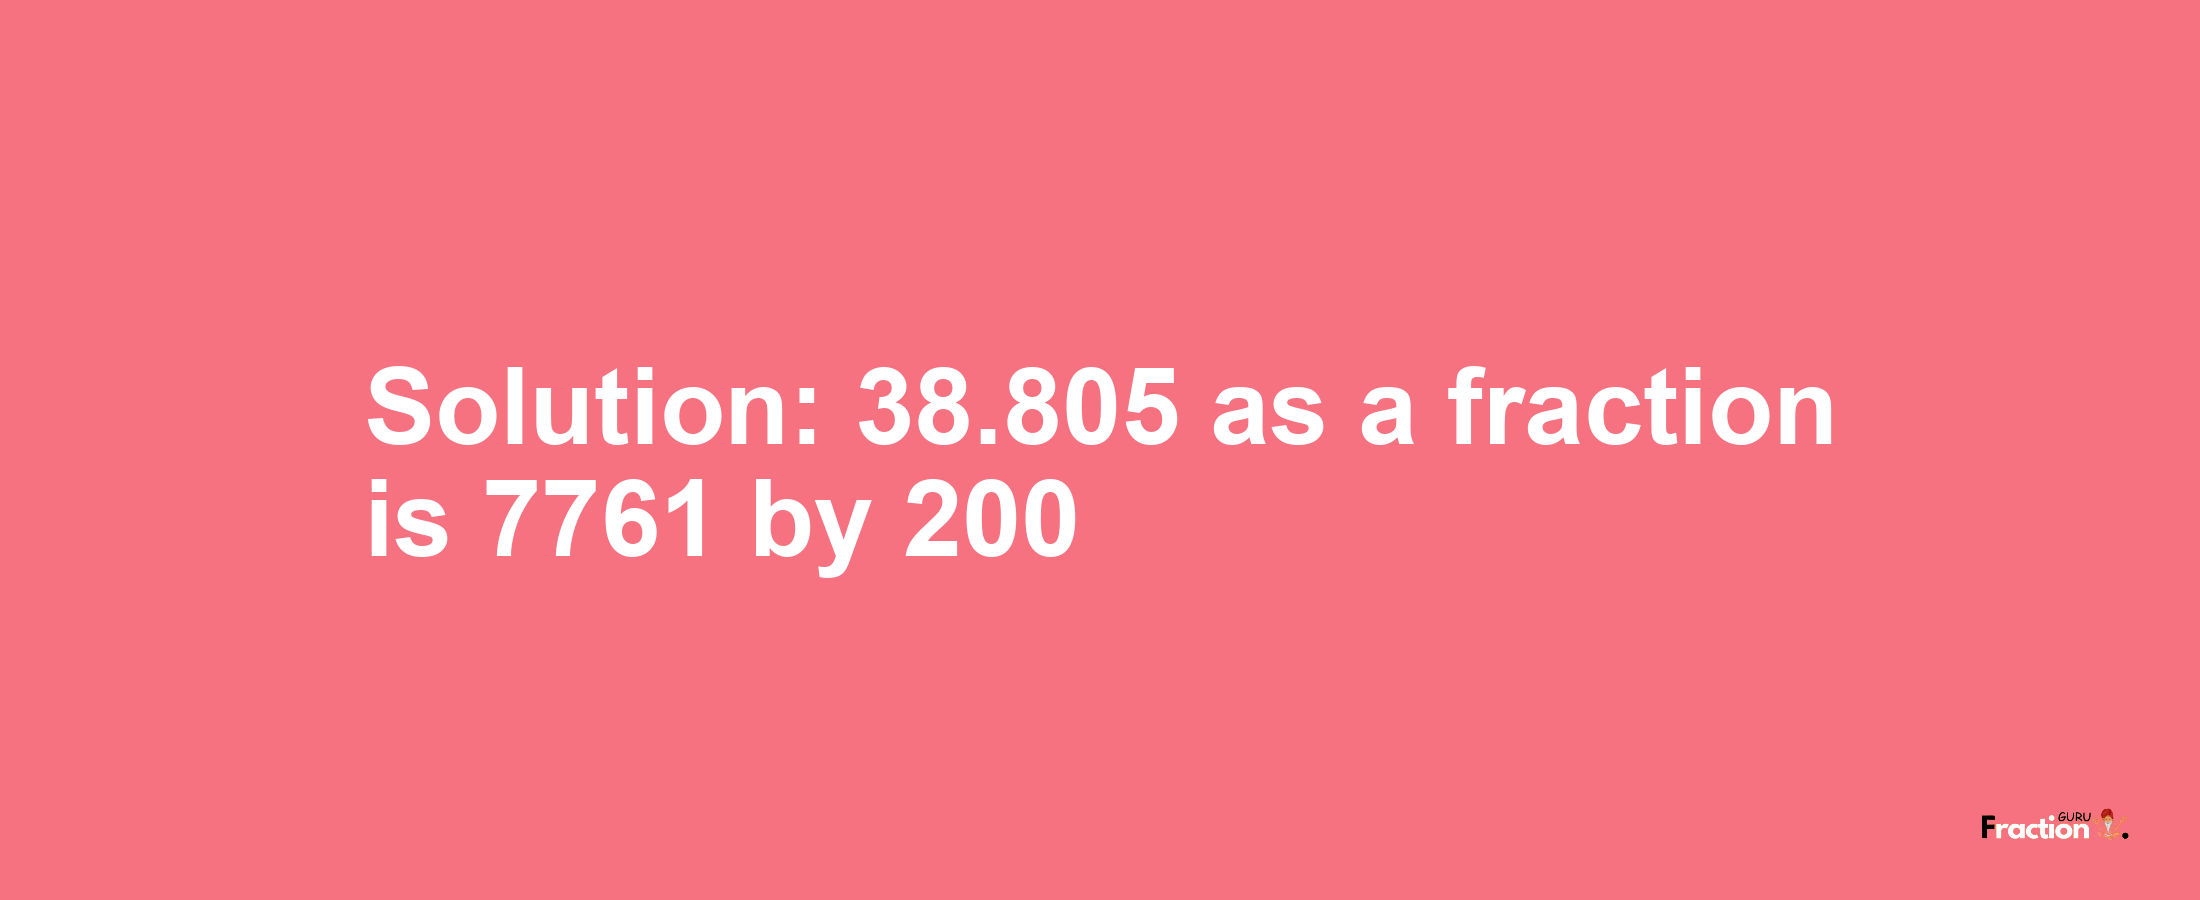 Solution:38.805 as a fraction is 7761/200